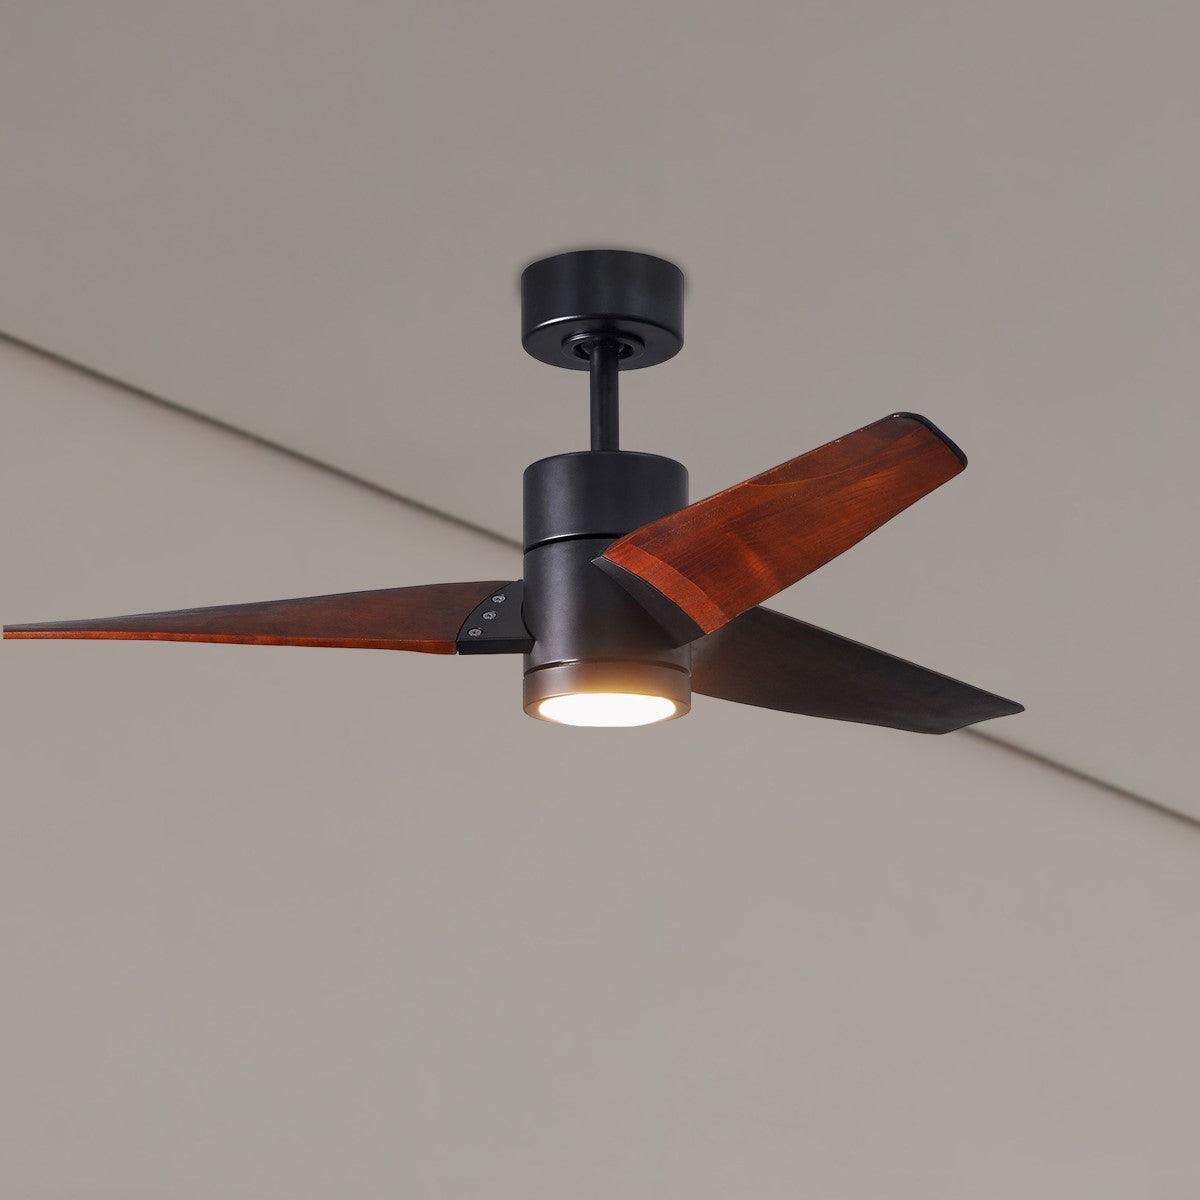 Super Janet 52 Inch Outdoor Ceiling Fan With Light, Wall And Remote Control Included - Bees Lighting